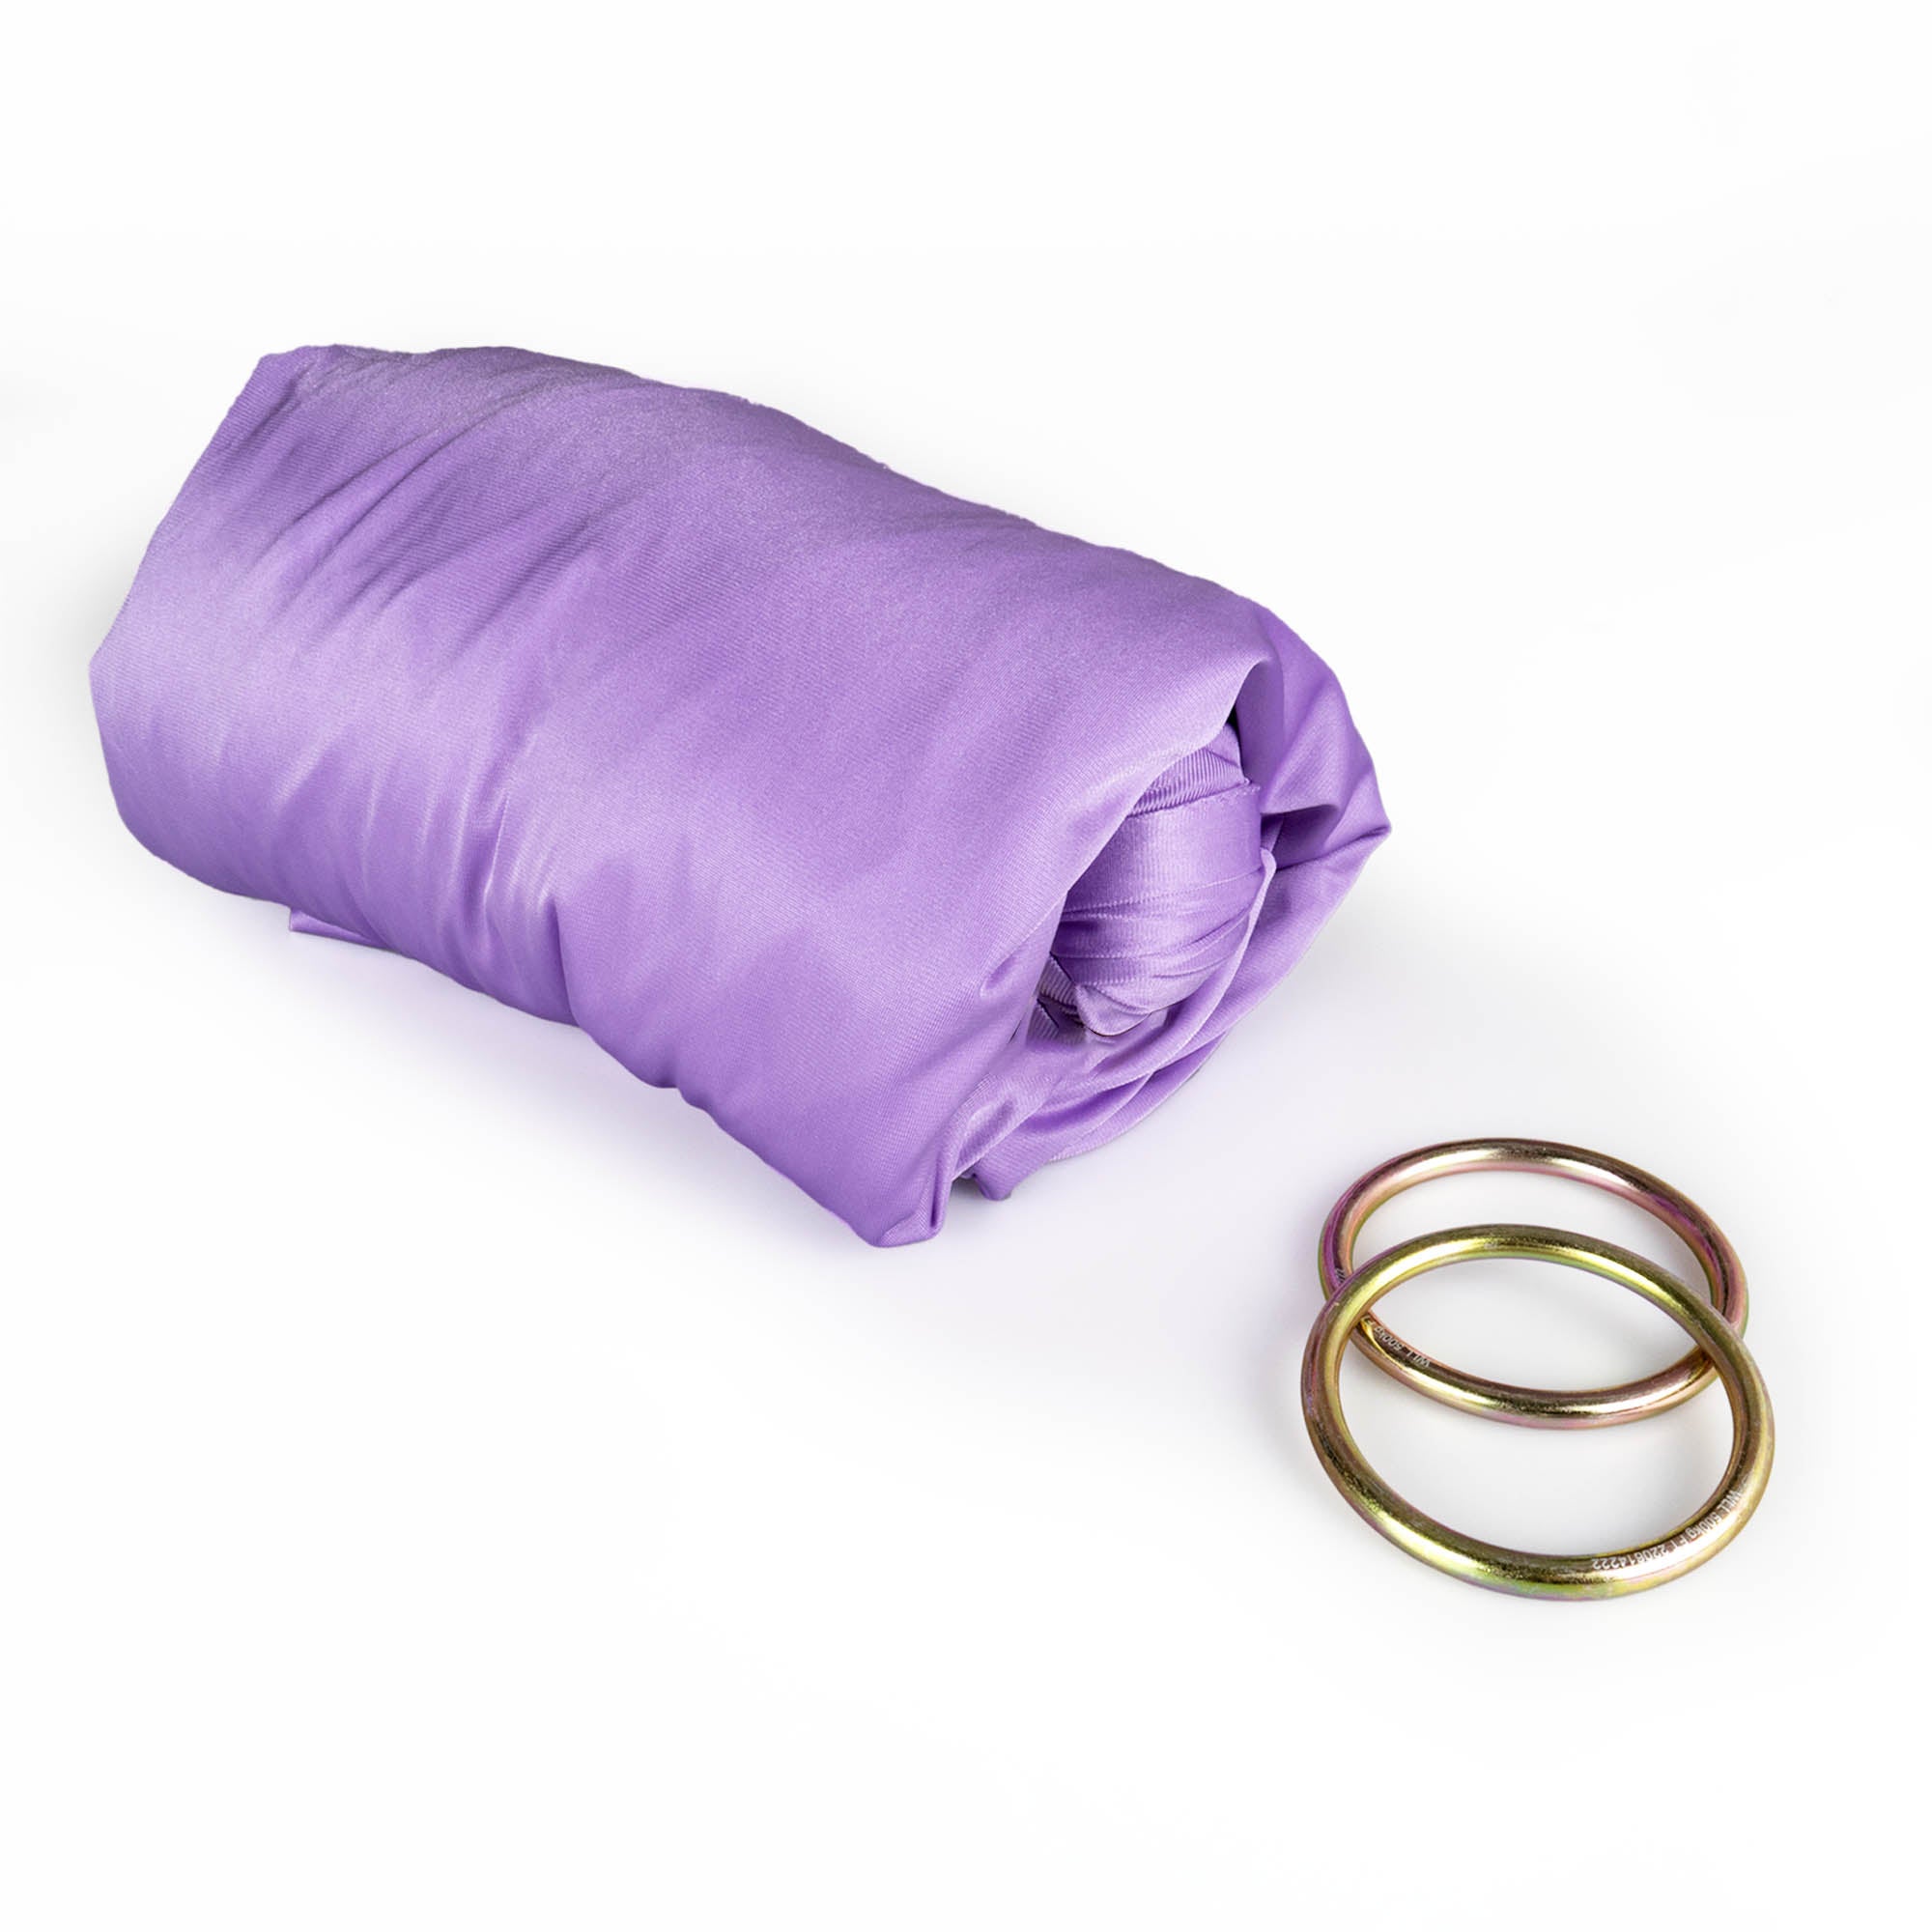 Lavender yoga hammock rolled up with ring dettached